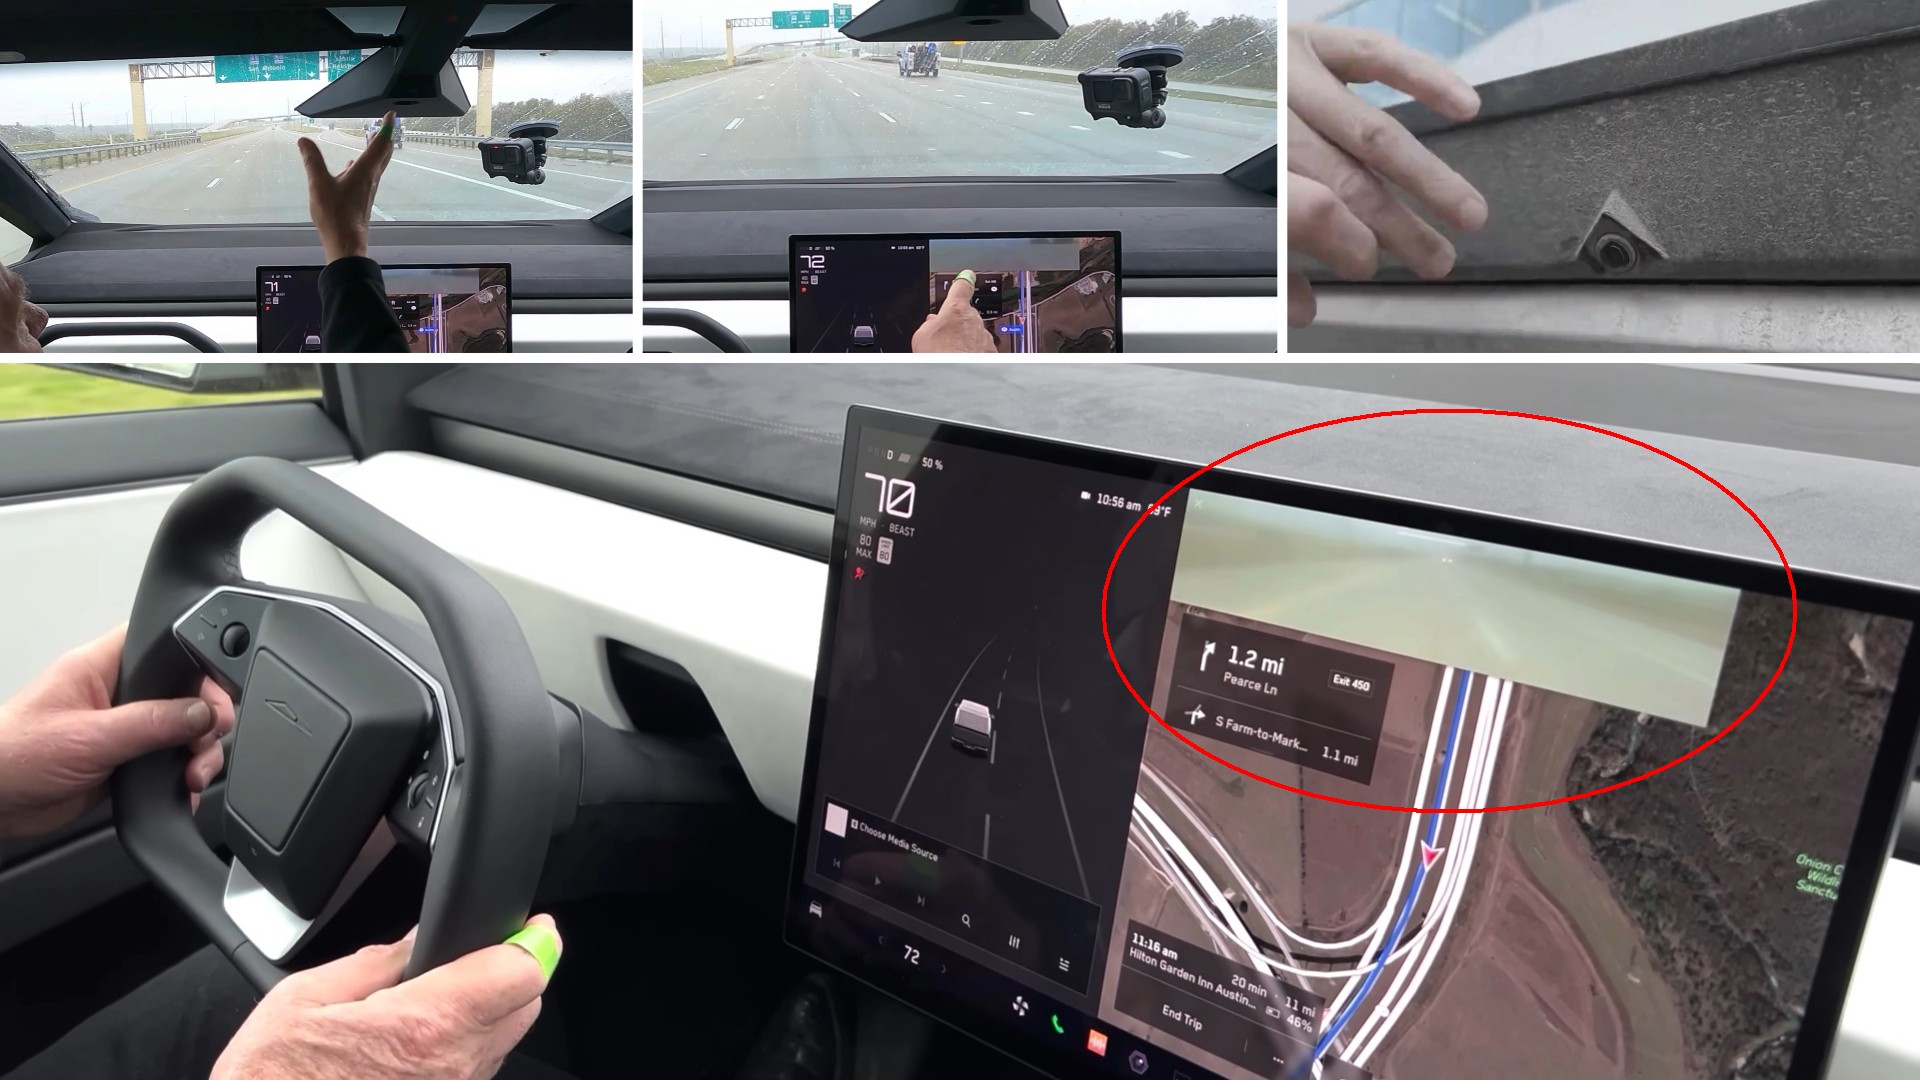 https://s1.cdn.autoevolution.com/images/news/the-cybertruck-has-a-rearview-mirror-problem-and-tesla-needs-to-address-it-225775_1.jpeg